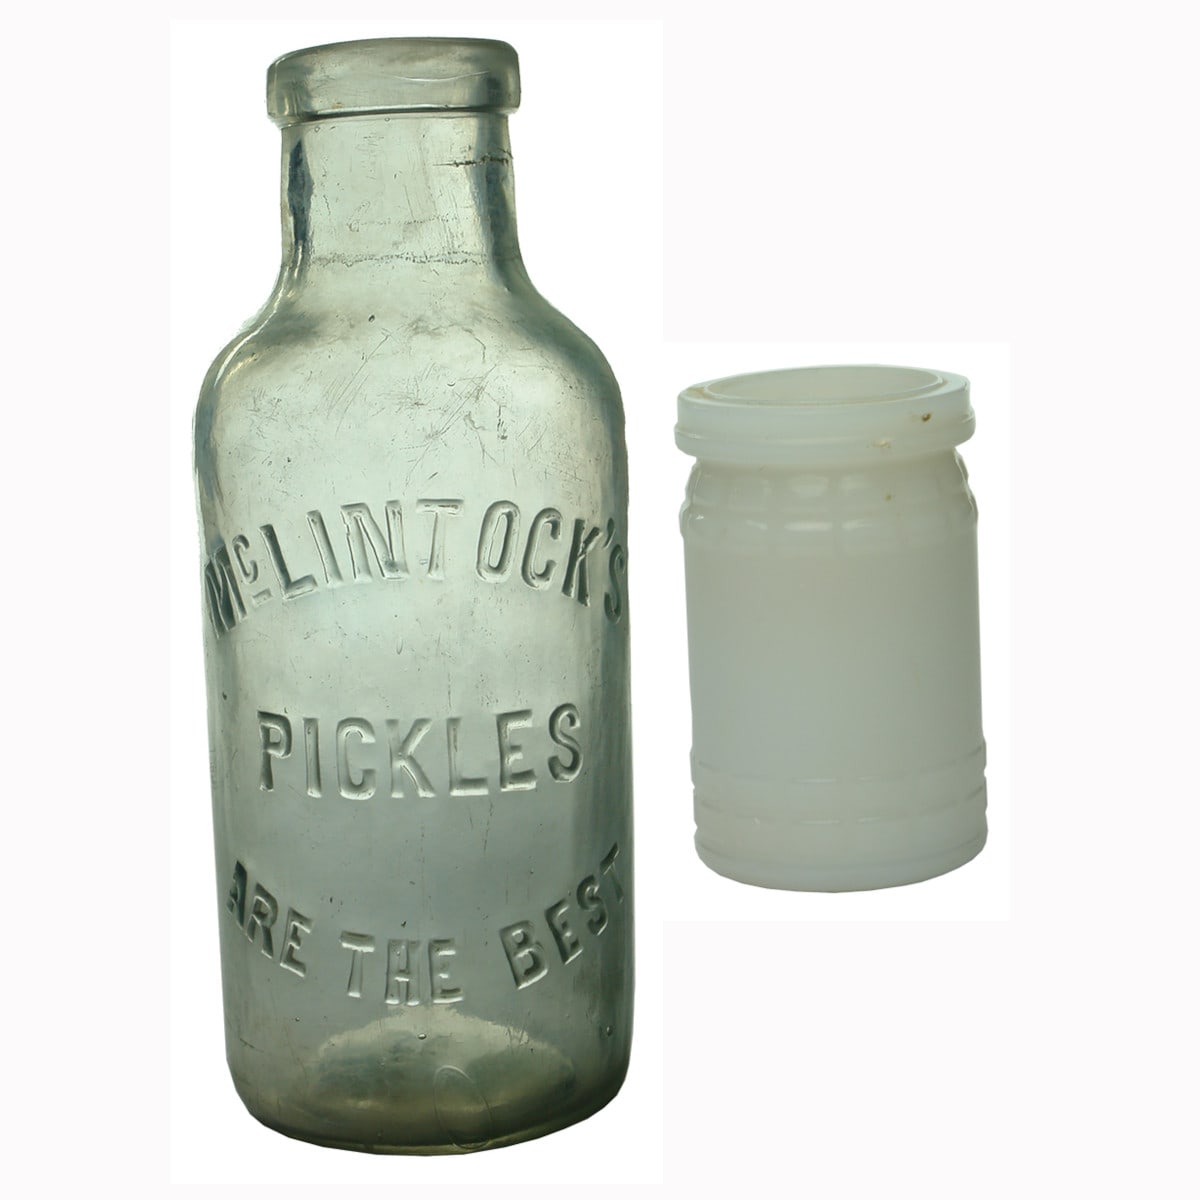 Two Household Jars: McLintock's Pickles and Milk Glass Pecks Paste.